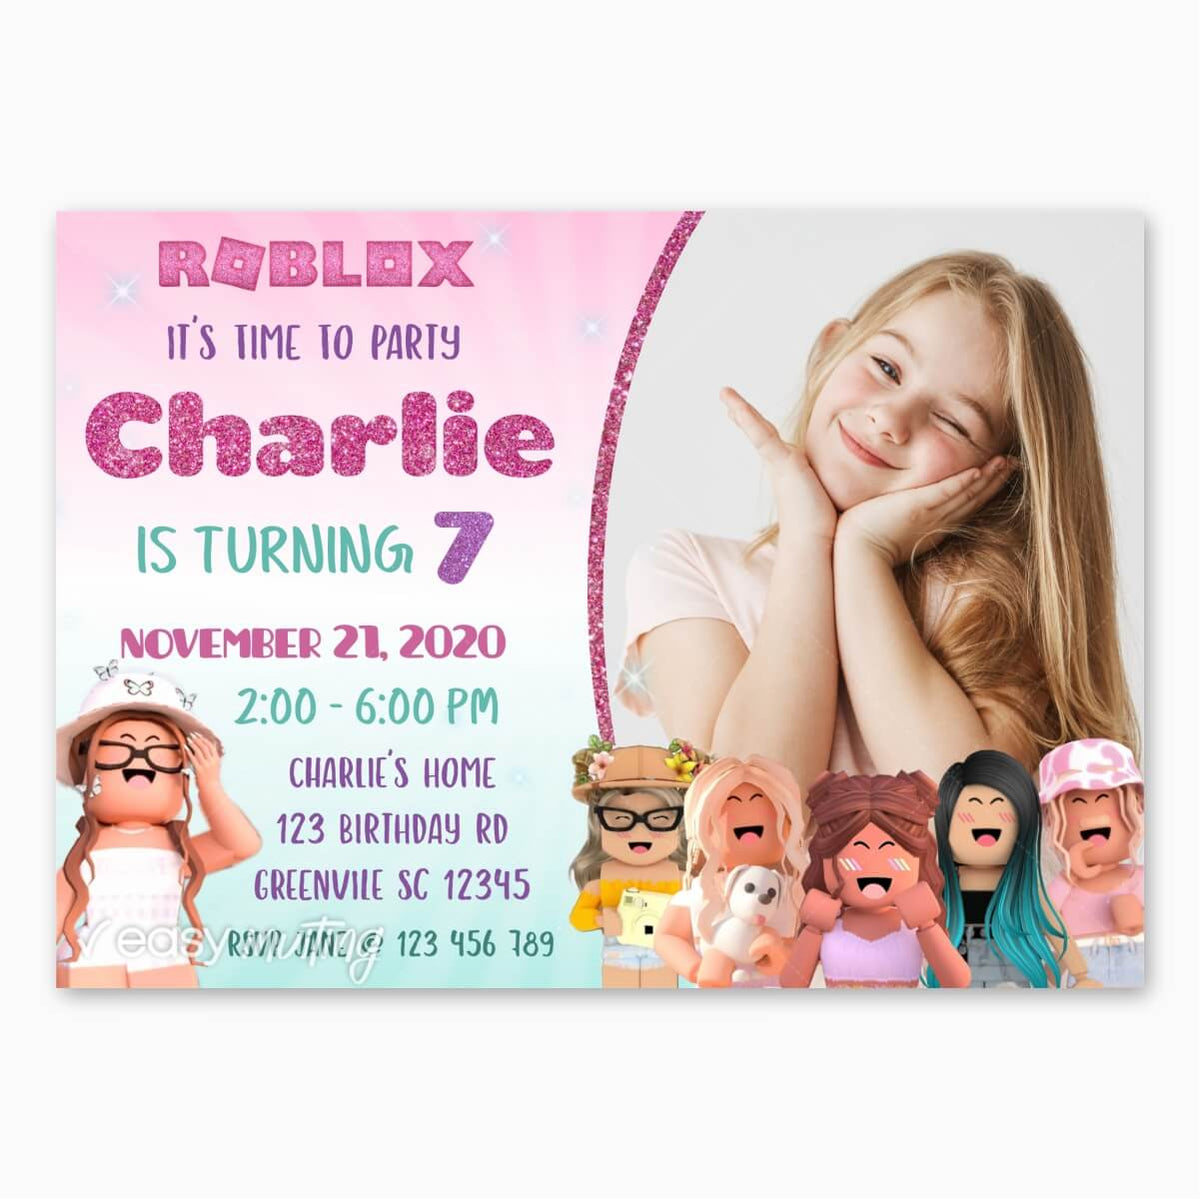 Roblox Birthday Invitation For Girls With Photo Easy Inviting - roblox birthday invitation printable